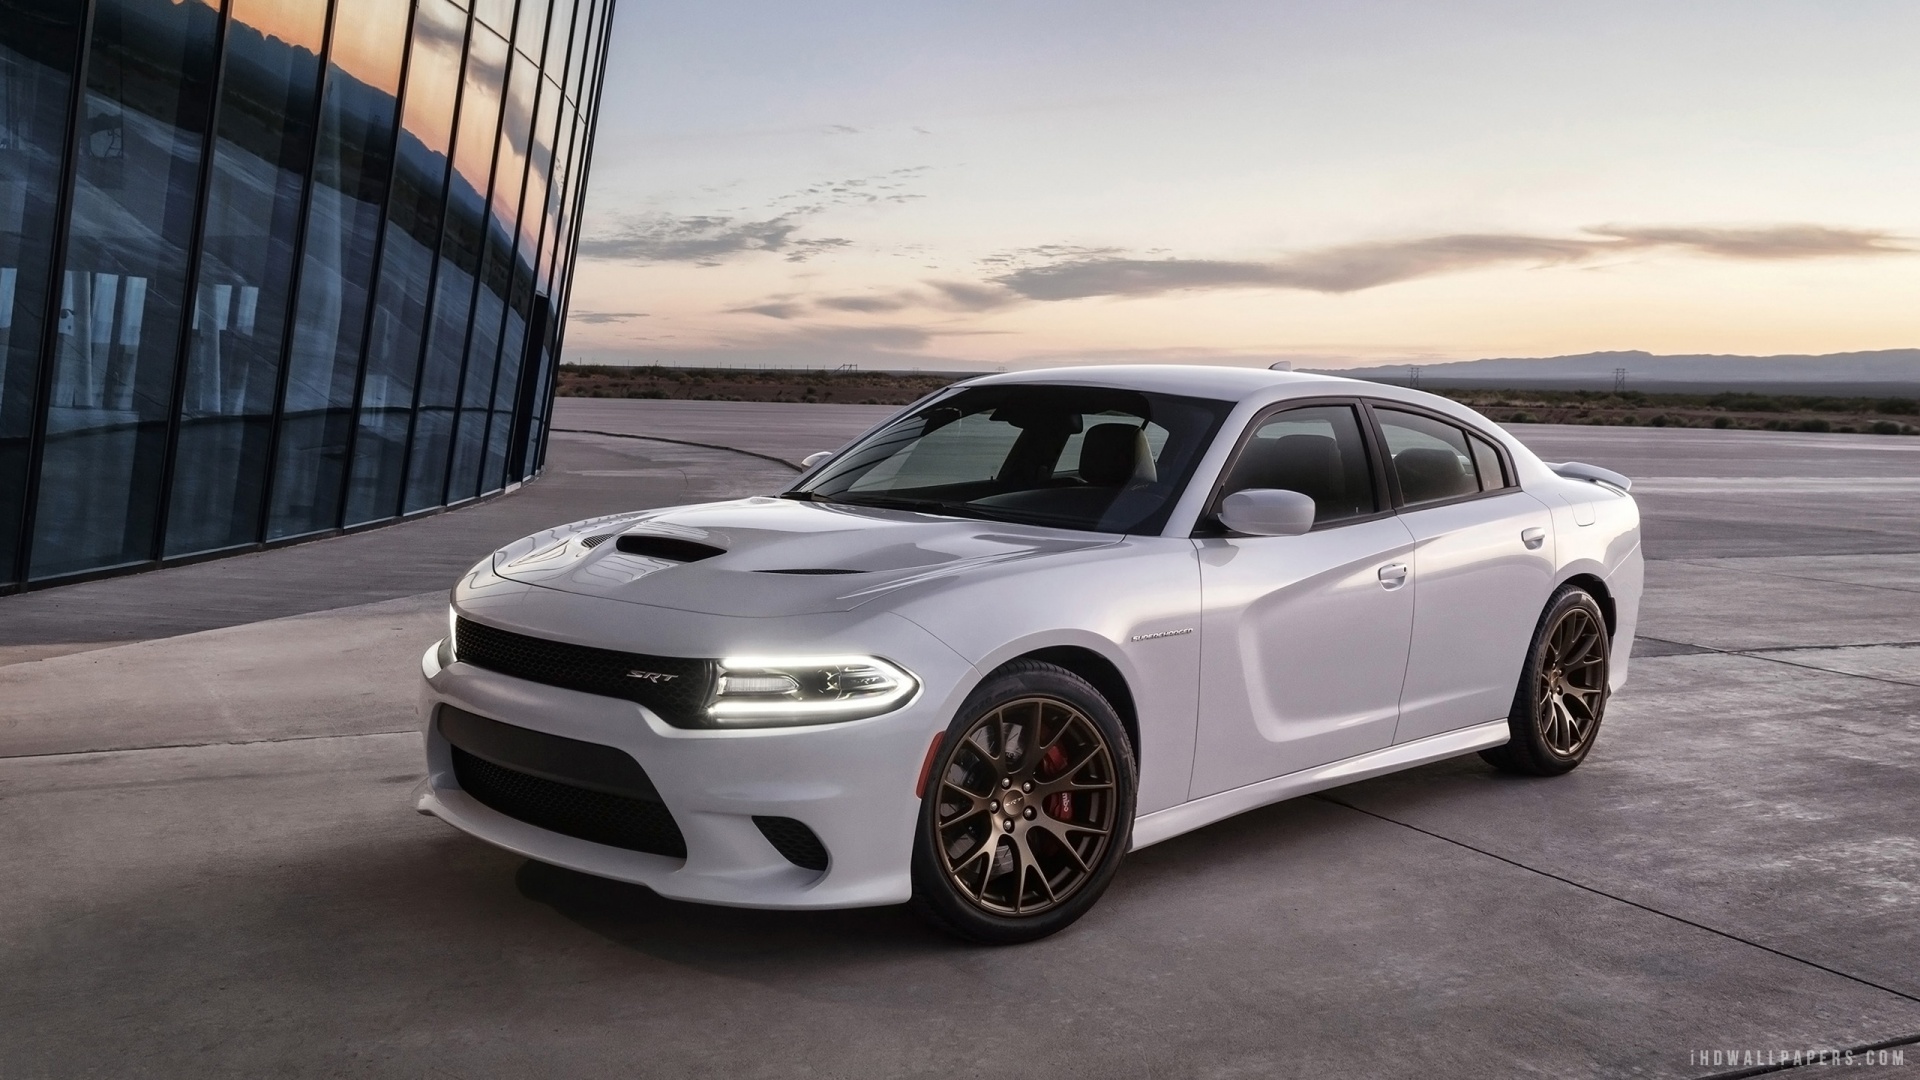 Awesome Dodge Charger Wallpaper For Android Download